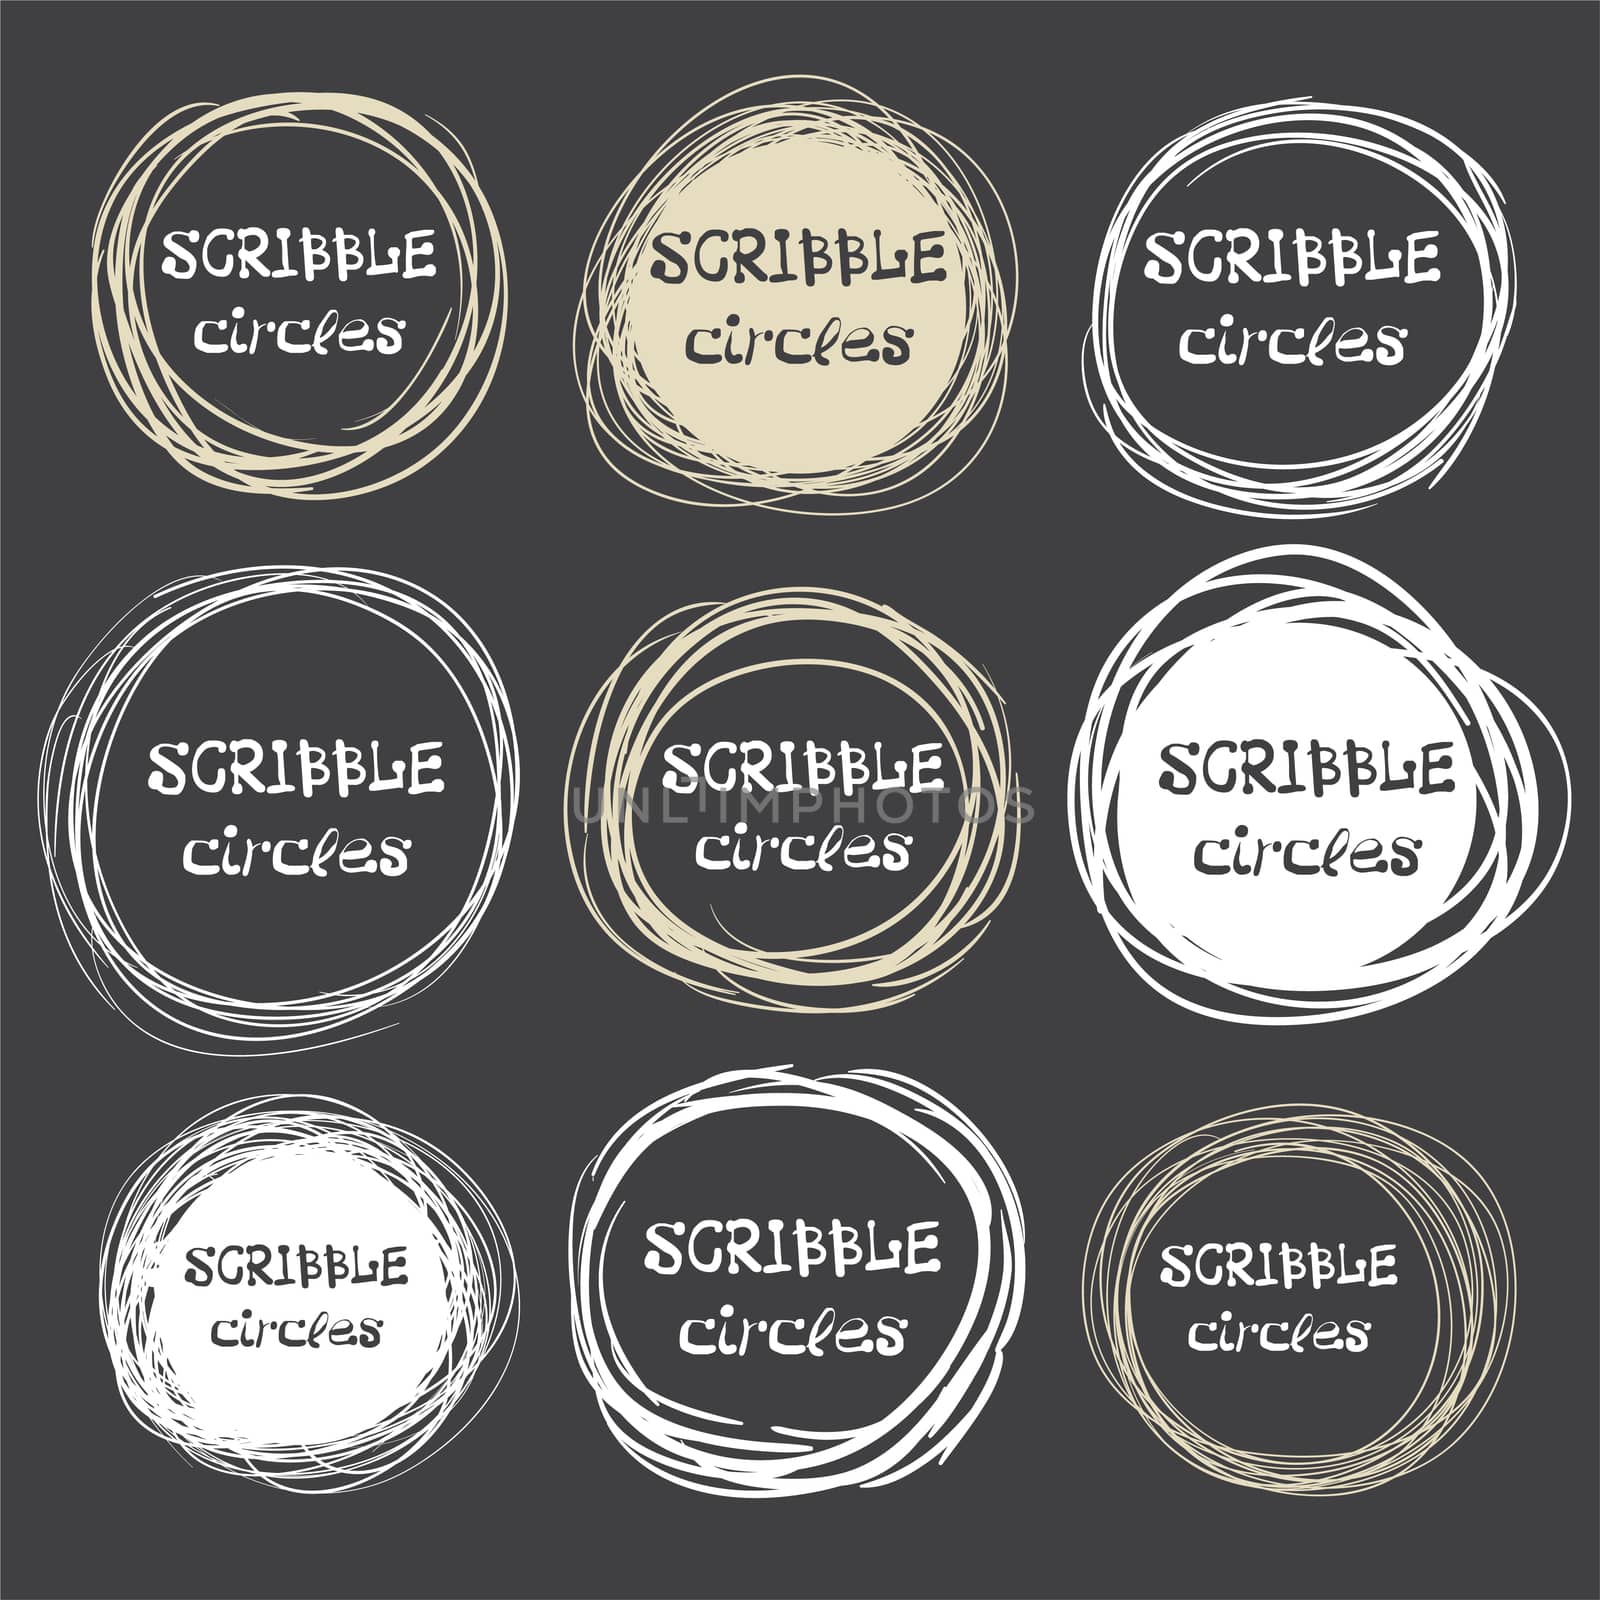 Collection of hand-drawn scribble circles against a dark background. illustration